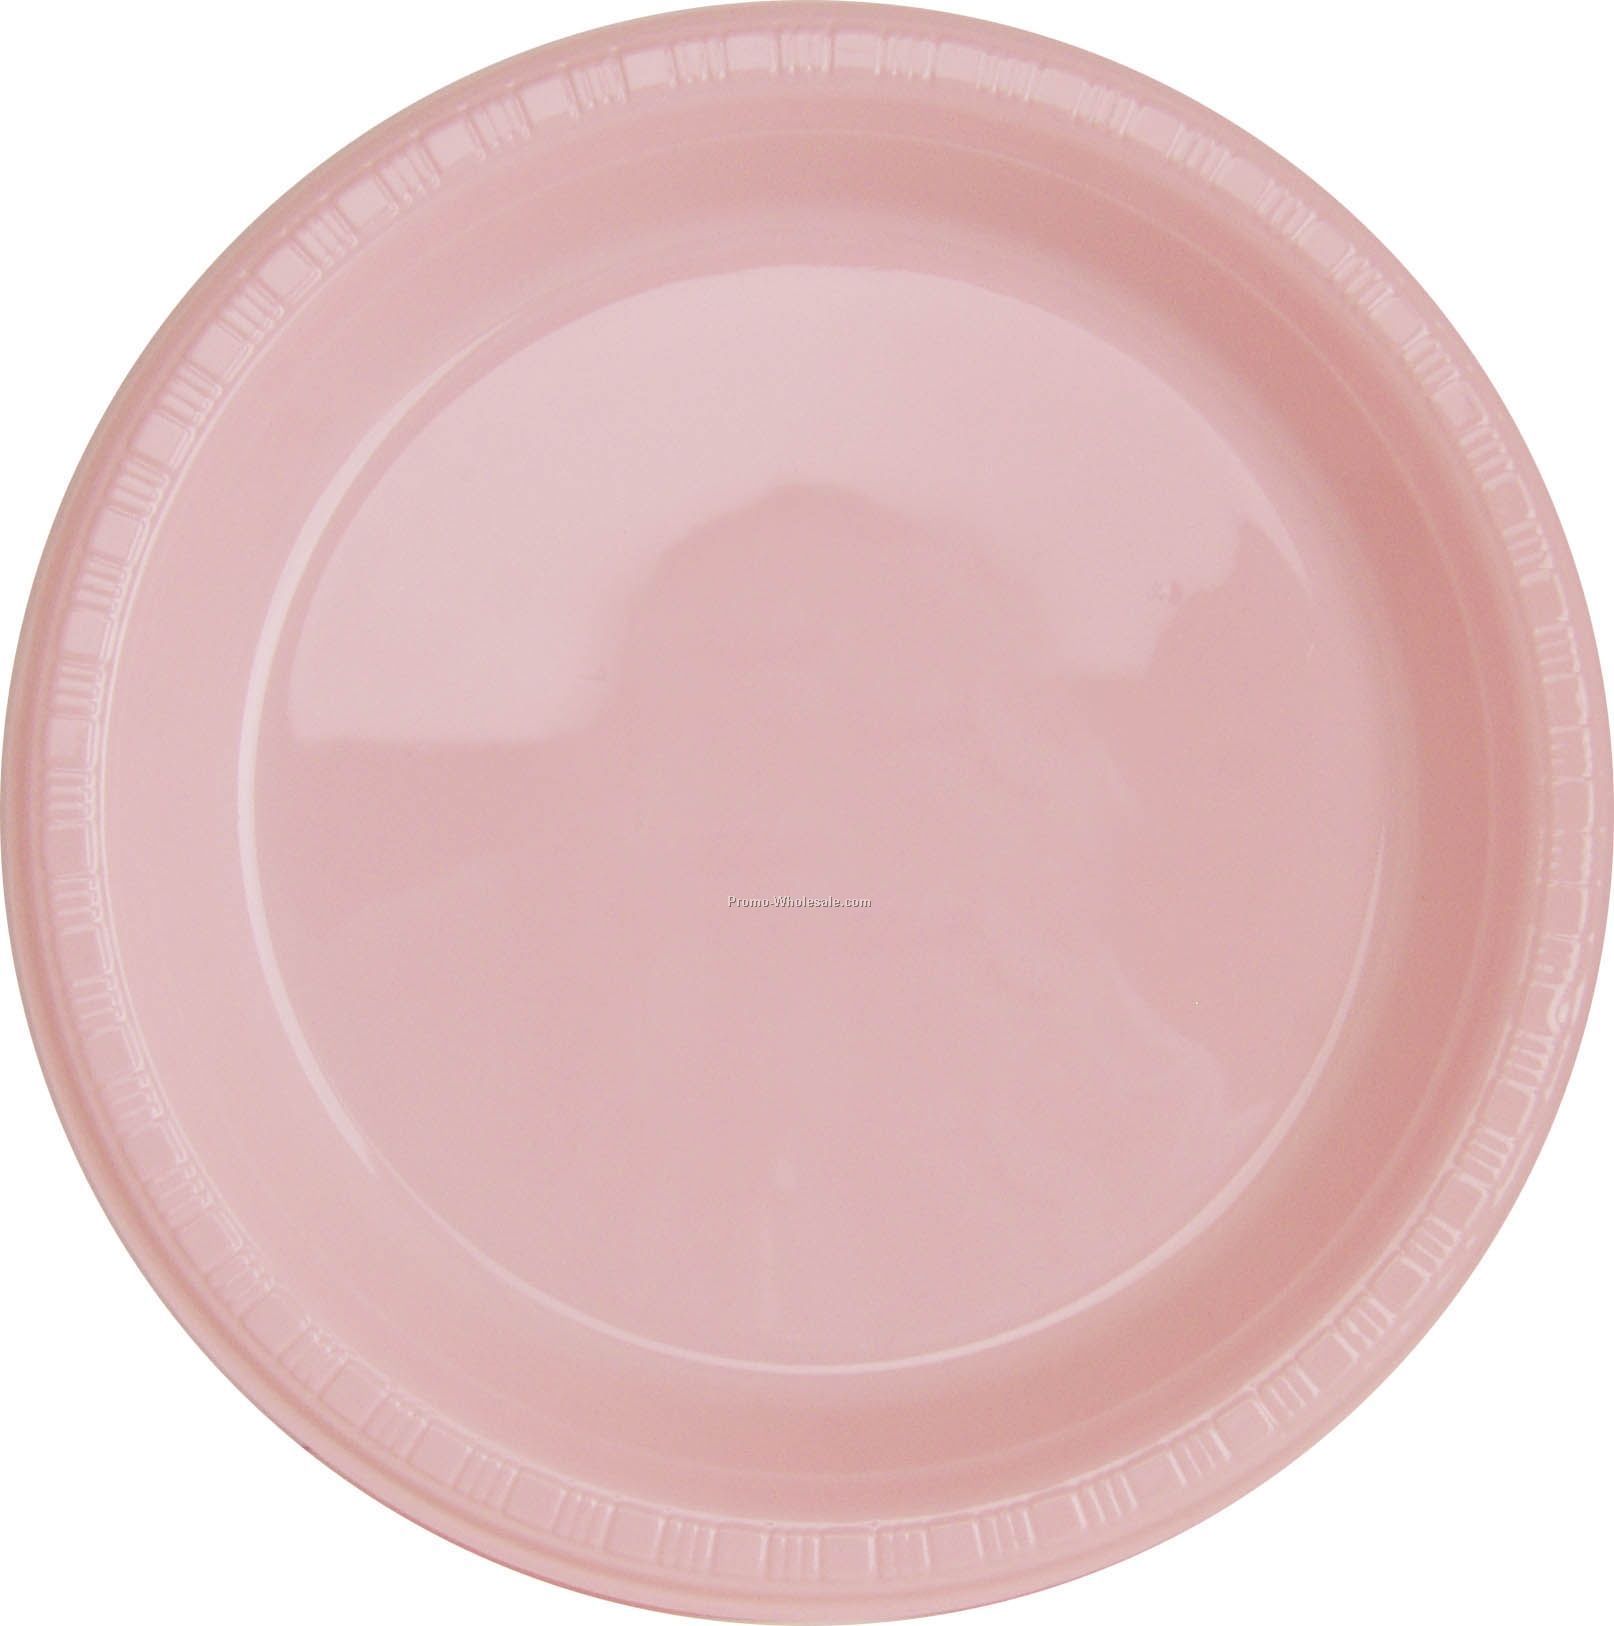 Colorware 9" Classic Pink Plate